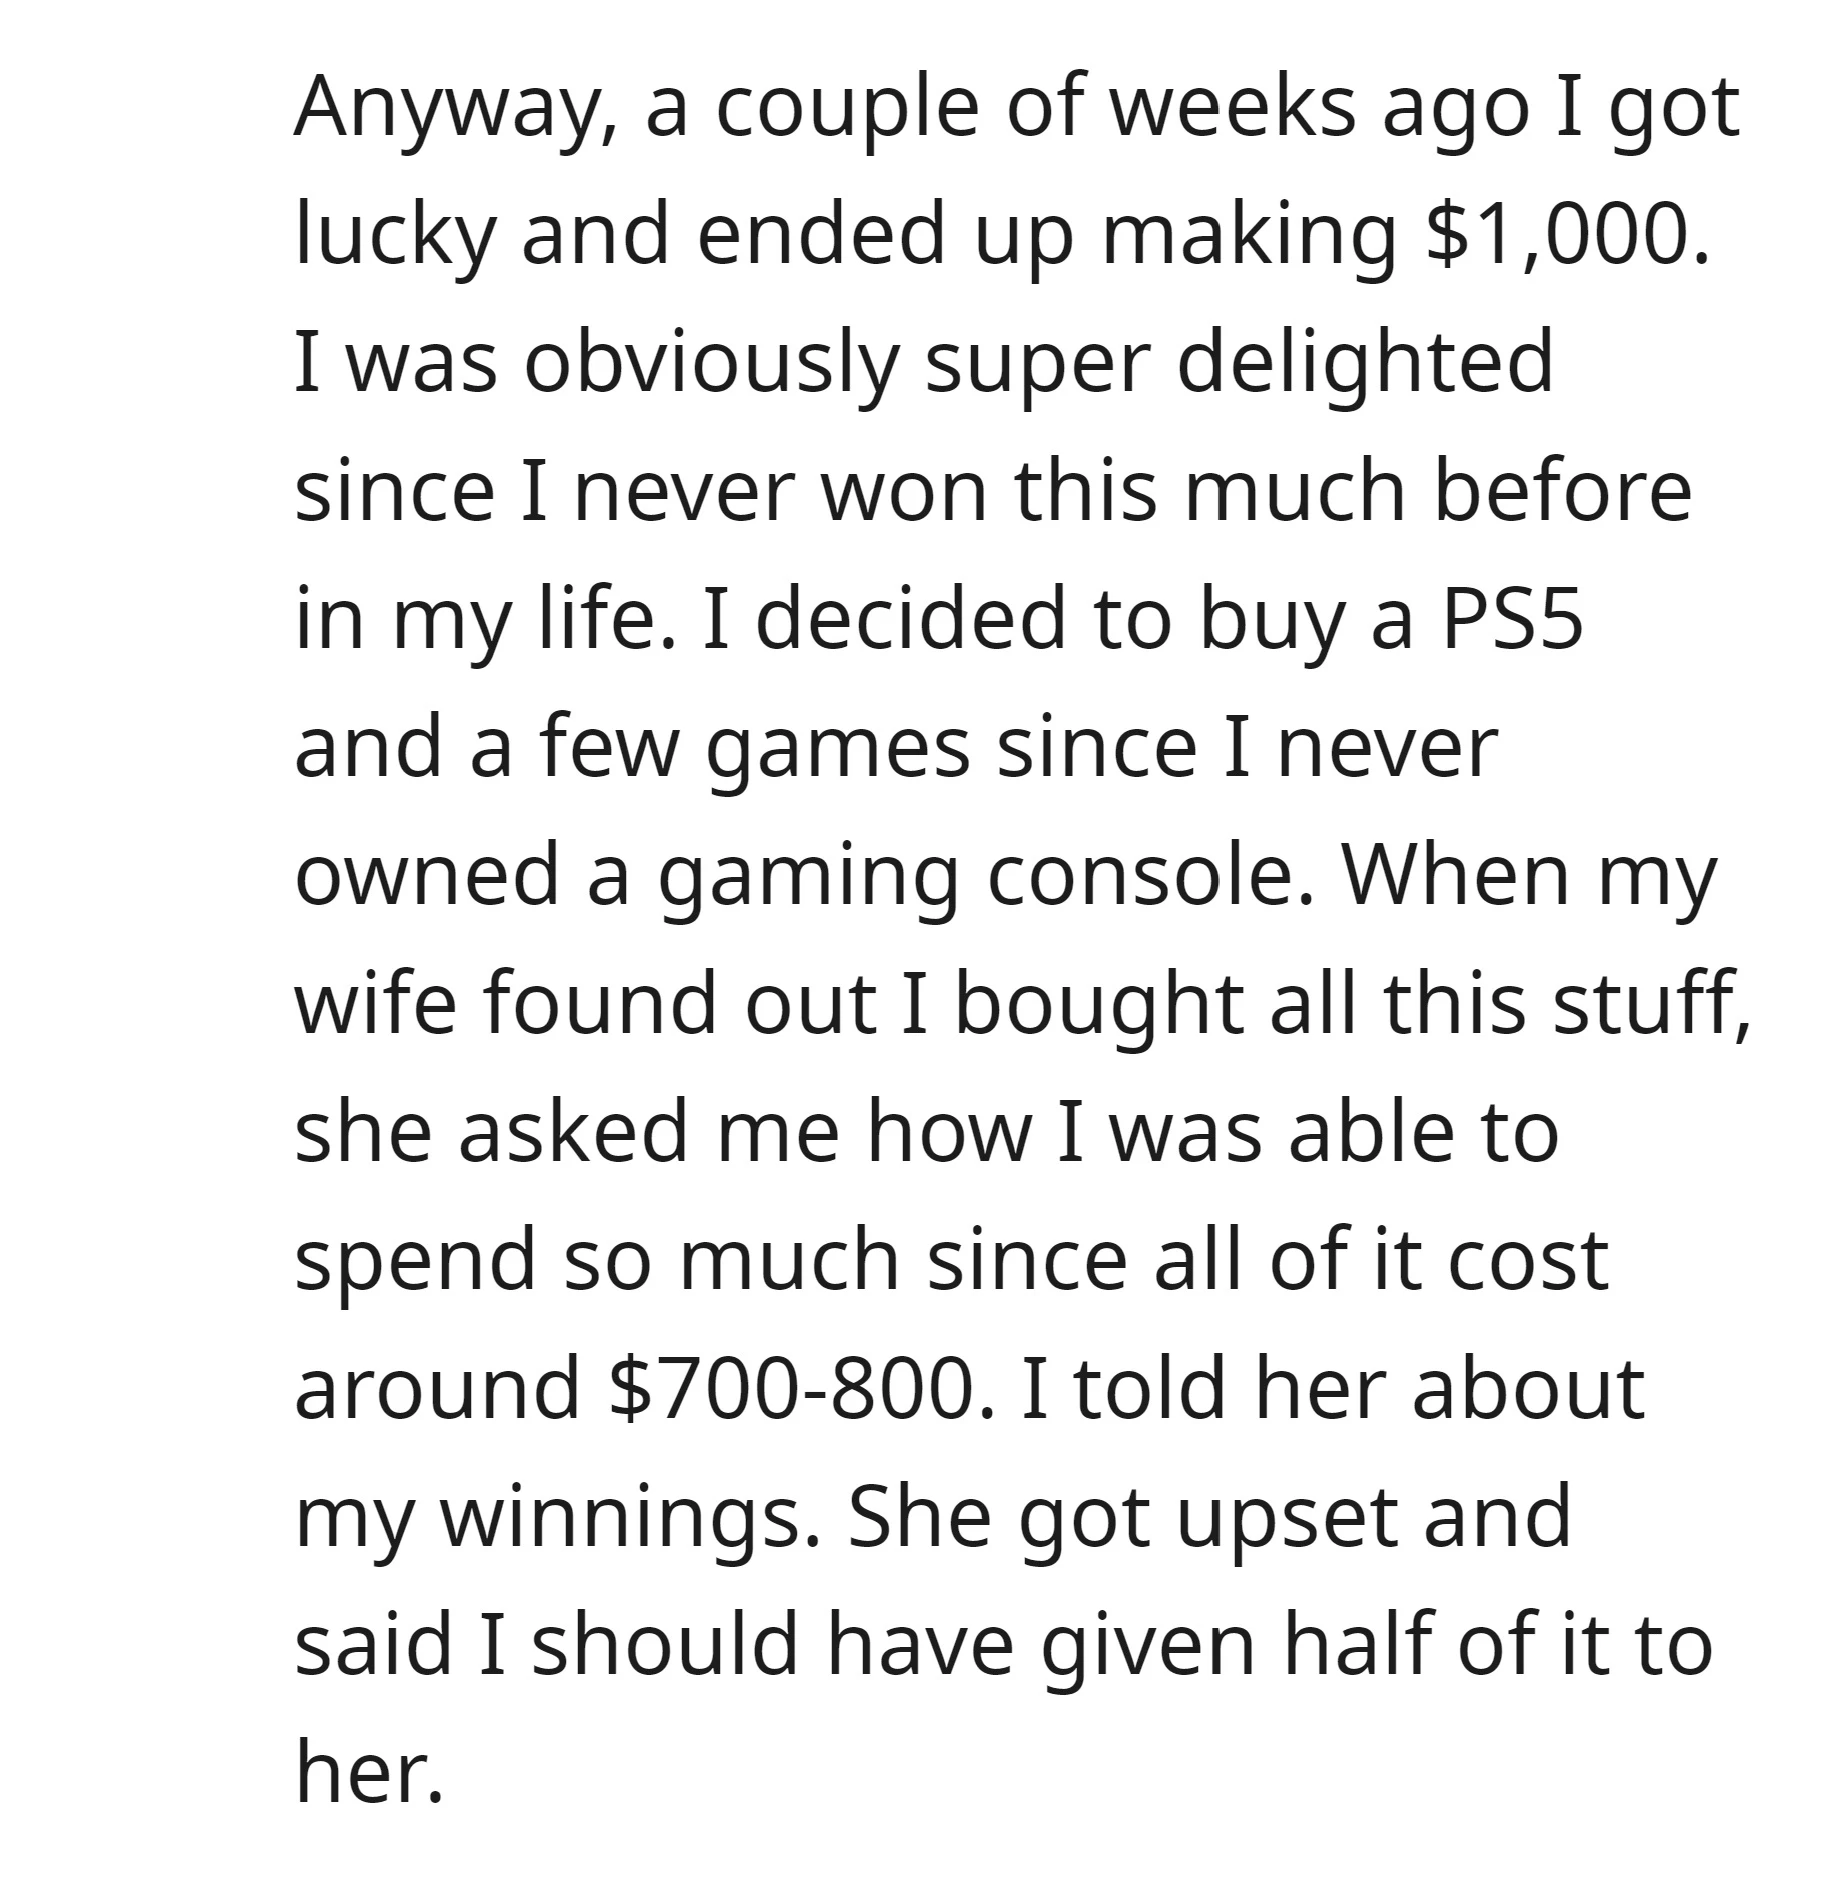 Turns out OP's wife doesn't like her hubby got a PS5, what's wrong with her?